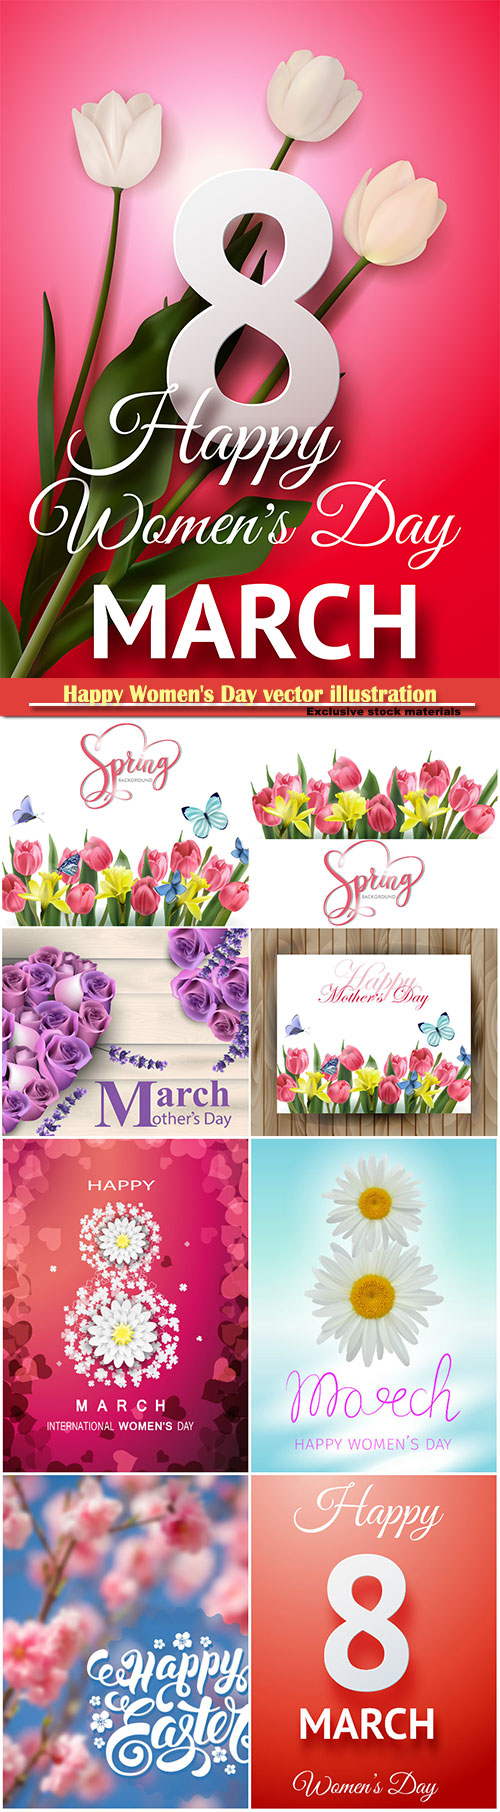 Happy Women's Day vector illustration,8 March, spring flower background # 7